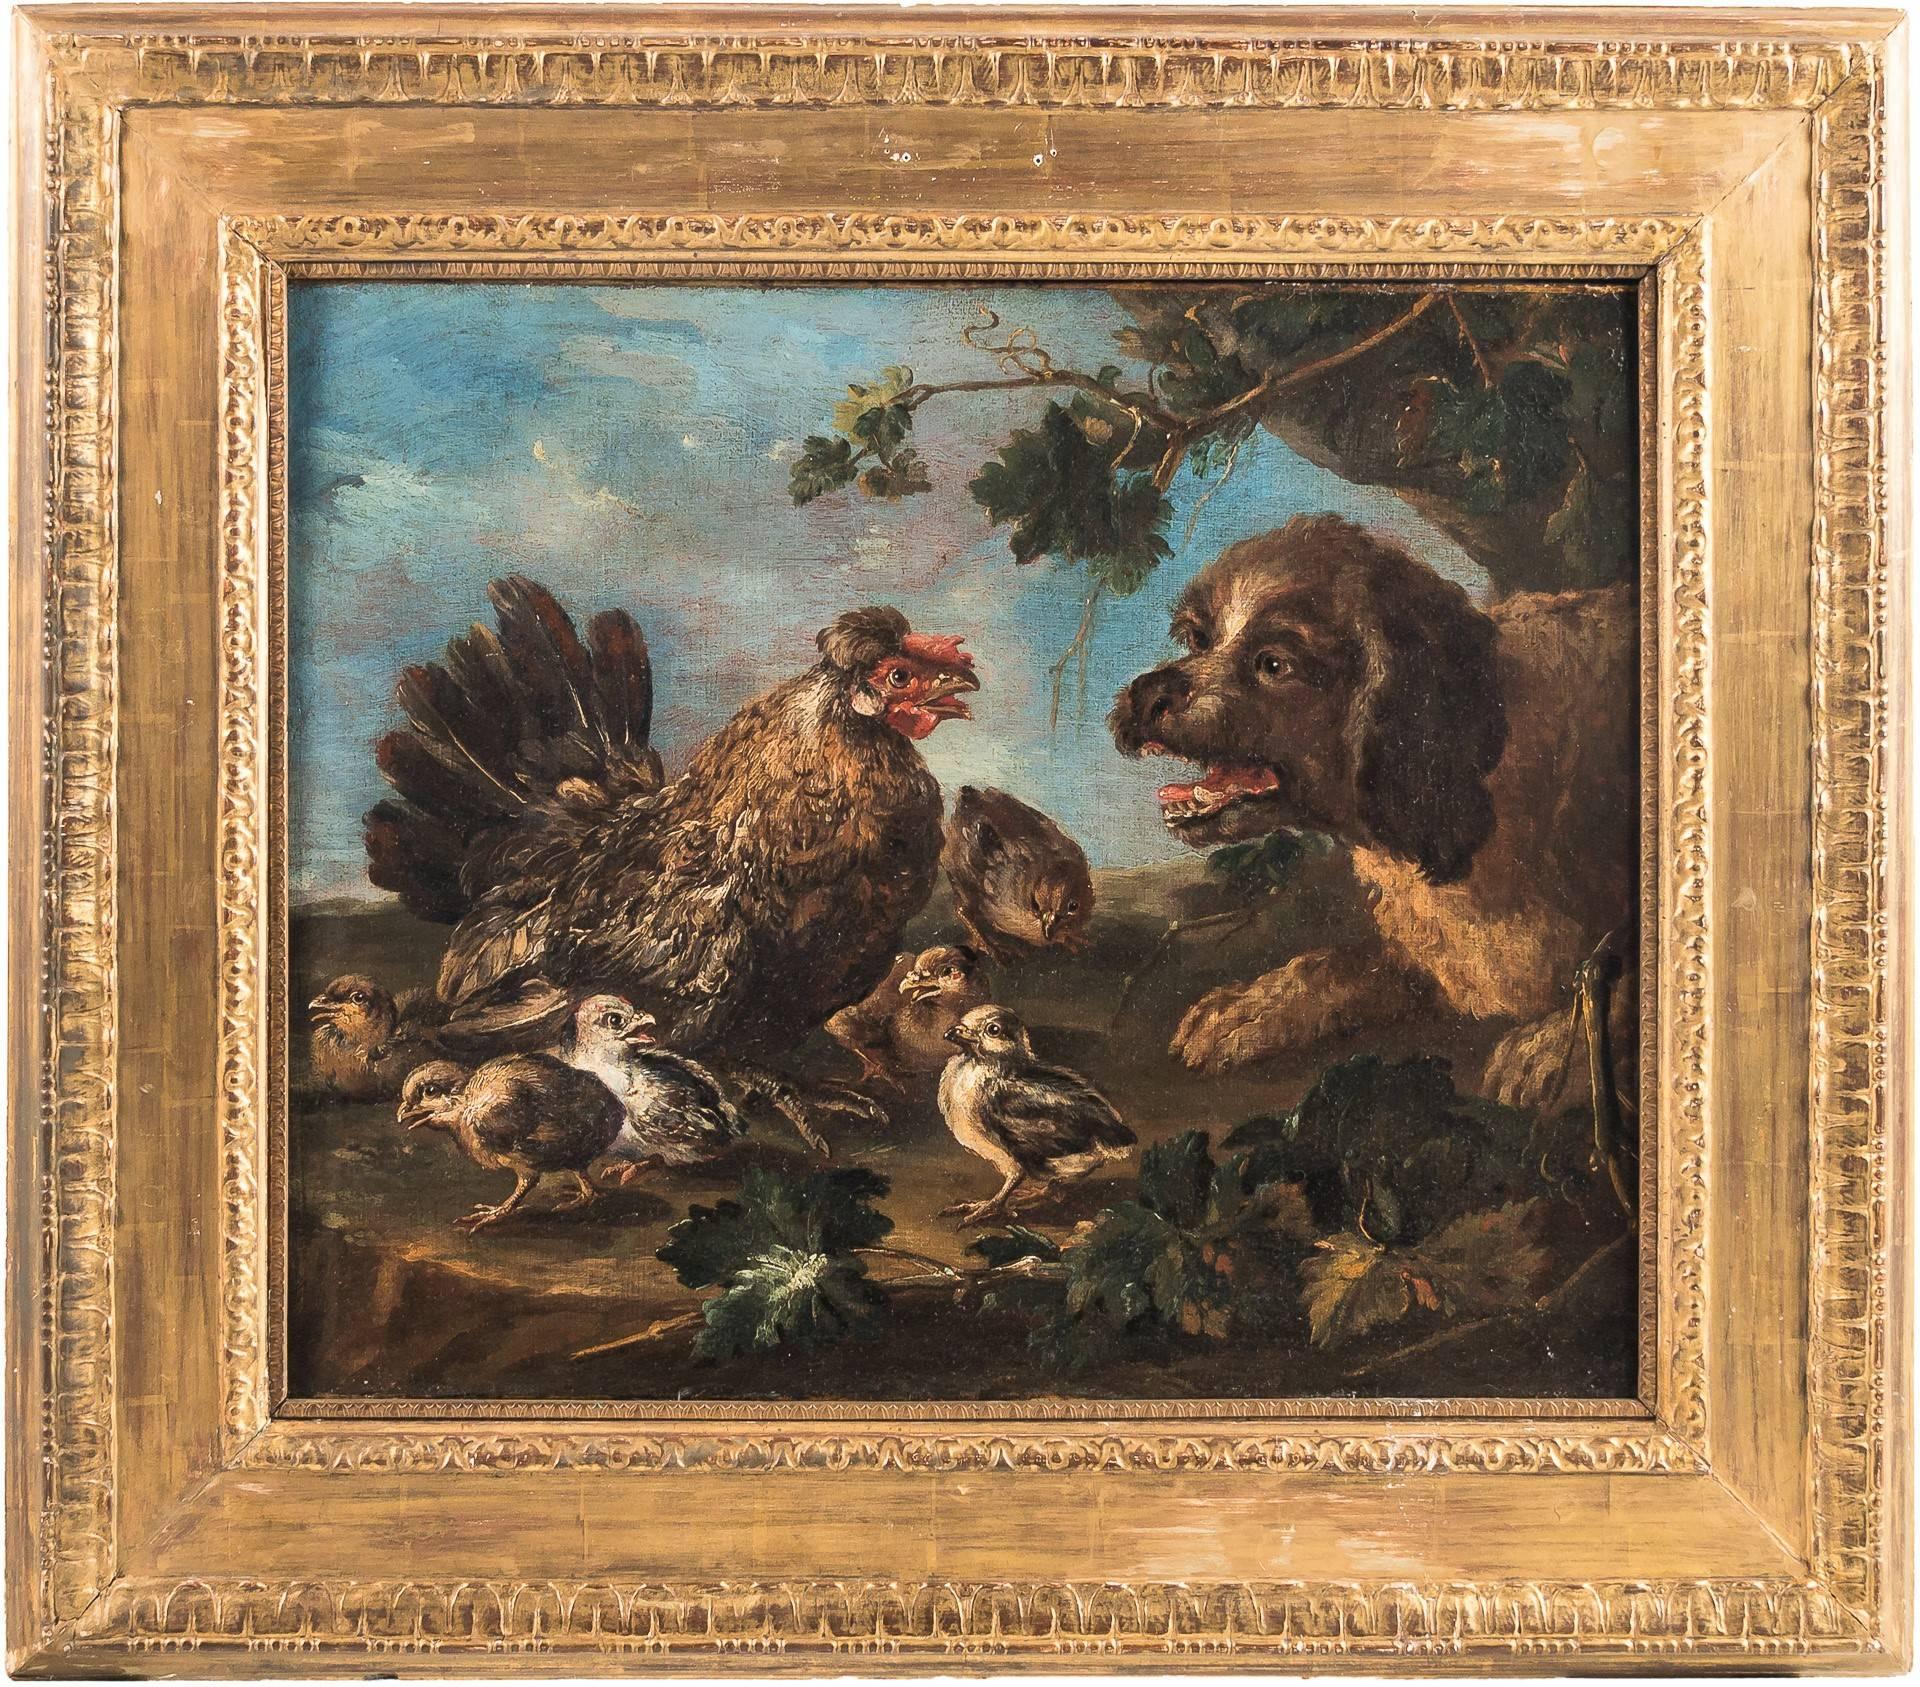 Angelo Maria Crivelli, known as Crivellone (Milan 1672 - Milan 1730) - "Animal depiction of a dog, a rooster and three chicks in a landscape". 

Oil on canvas, in carved and gilded wooden frame.
